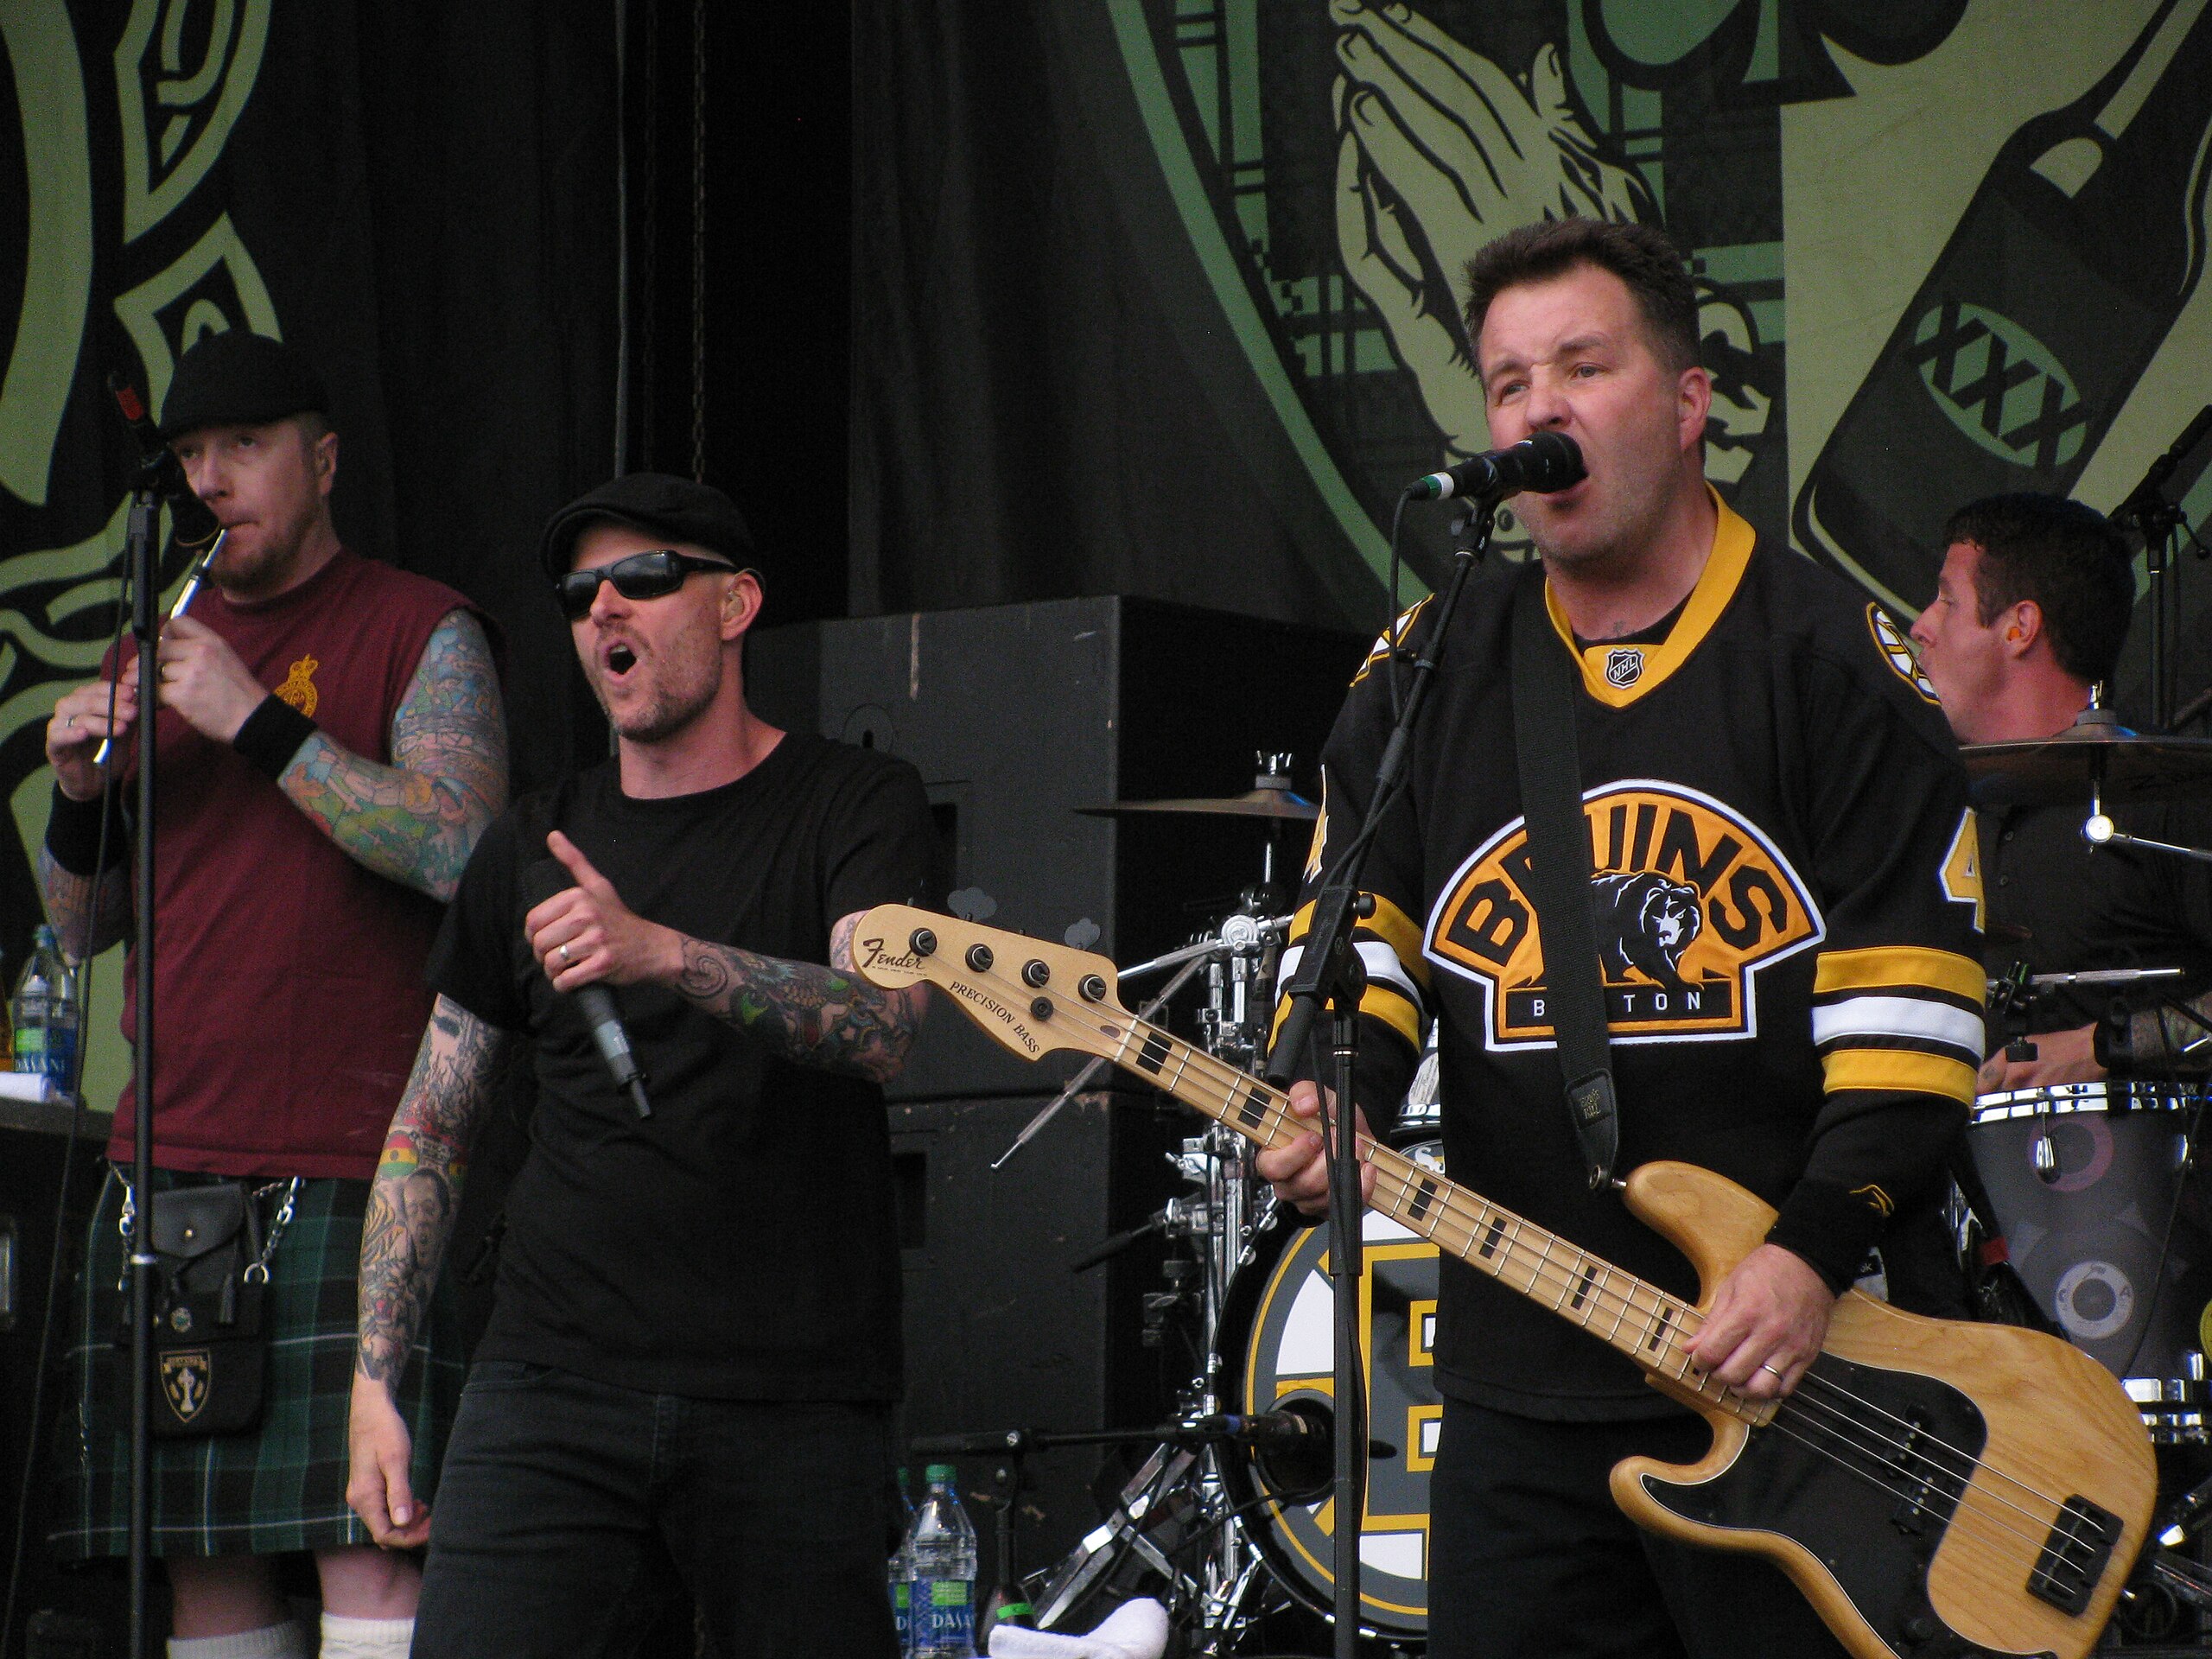 10 Million People Watched the Dropkick Murphys Play Online. Is